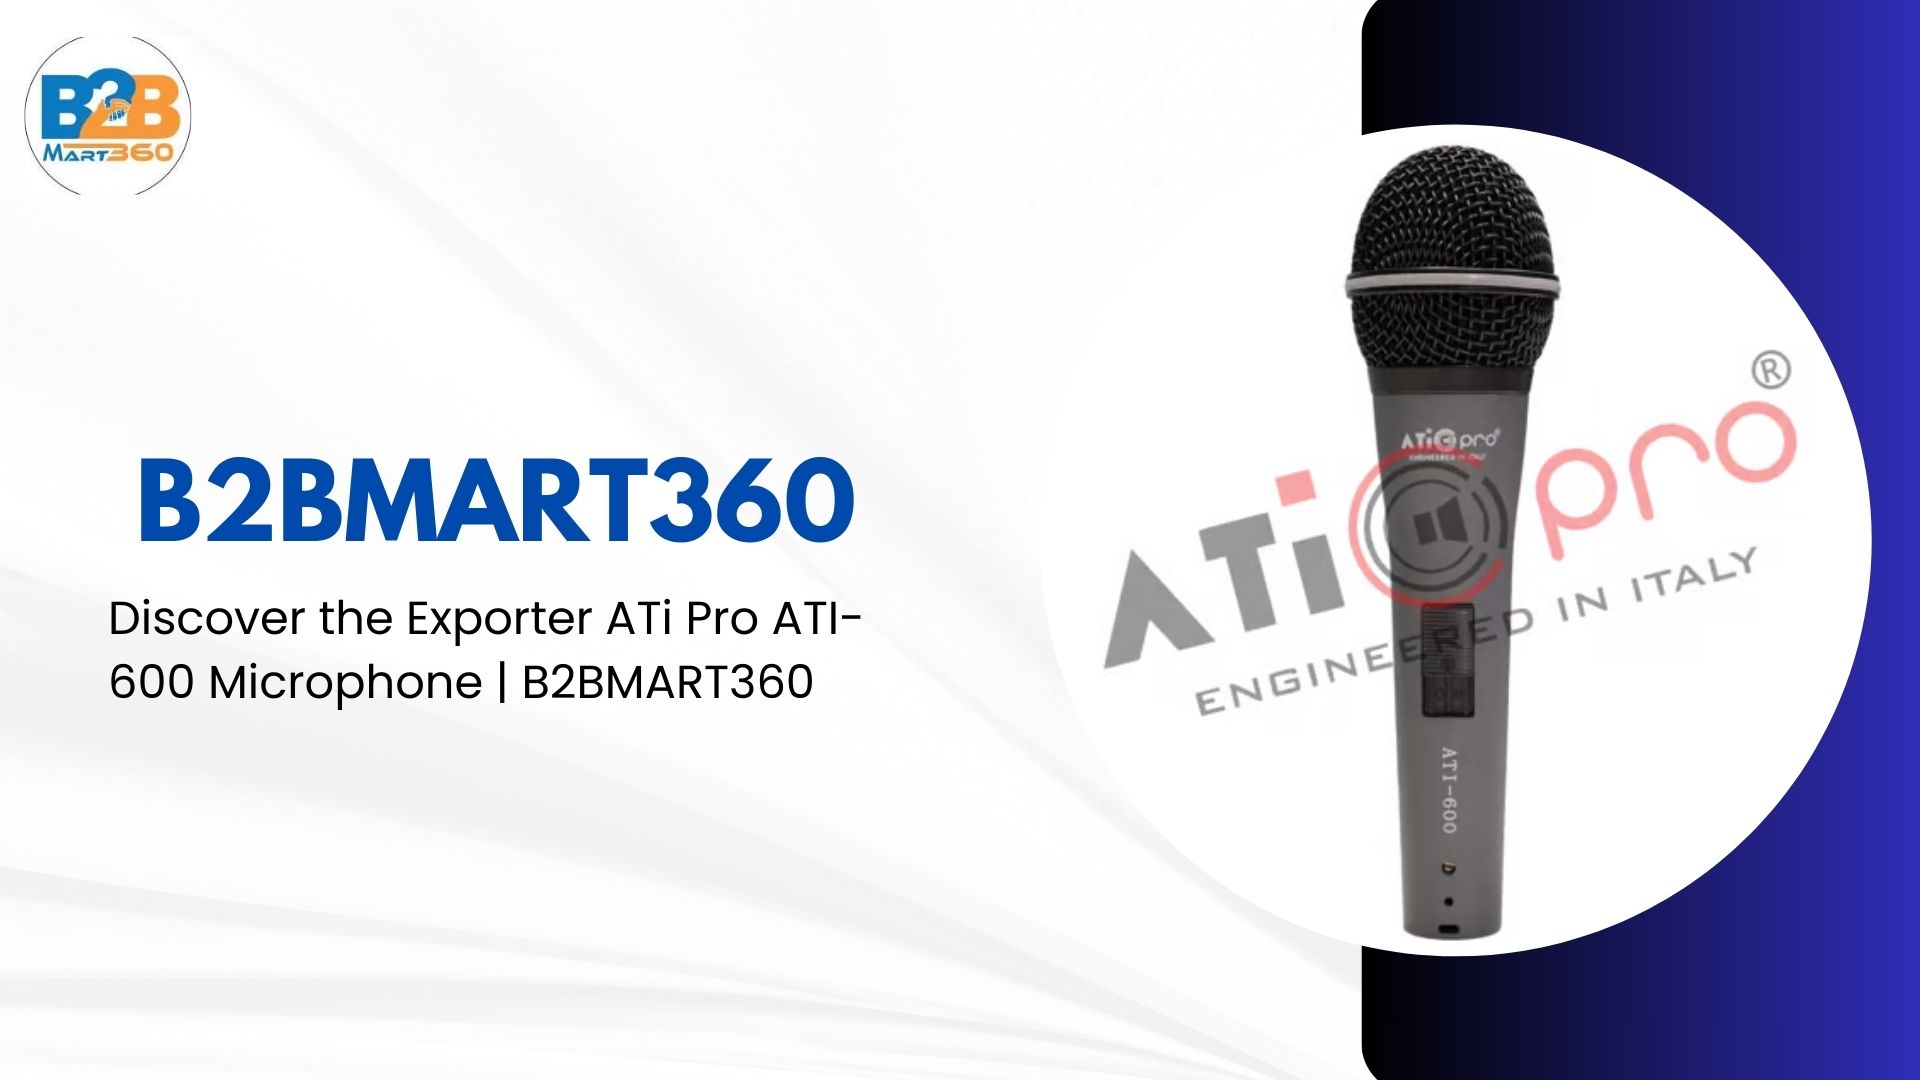 Discover the Exporter ATi Pro ATI-600 Microphone | B2BMART360Buy and SellElectronic ItemsCentral DelhiOther